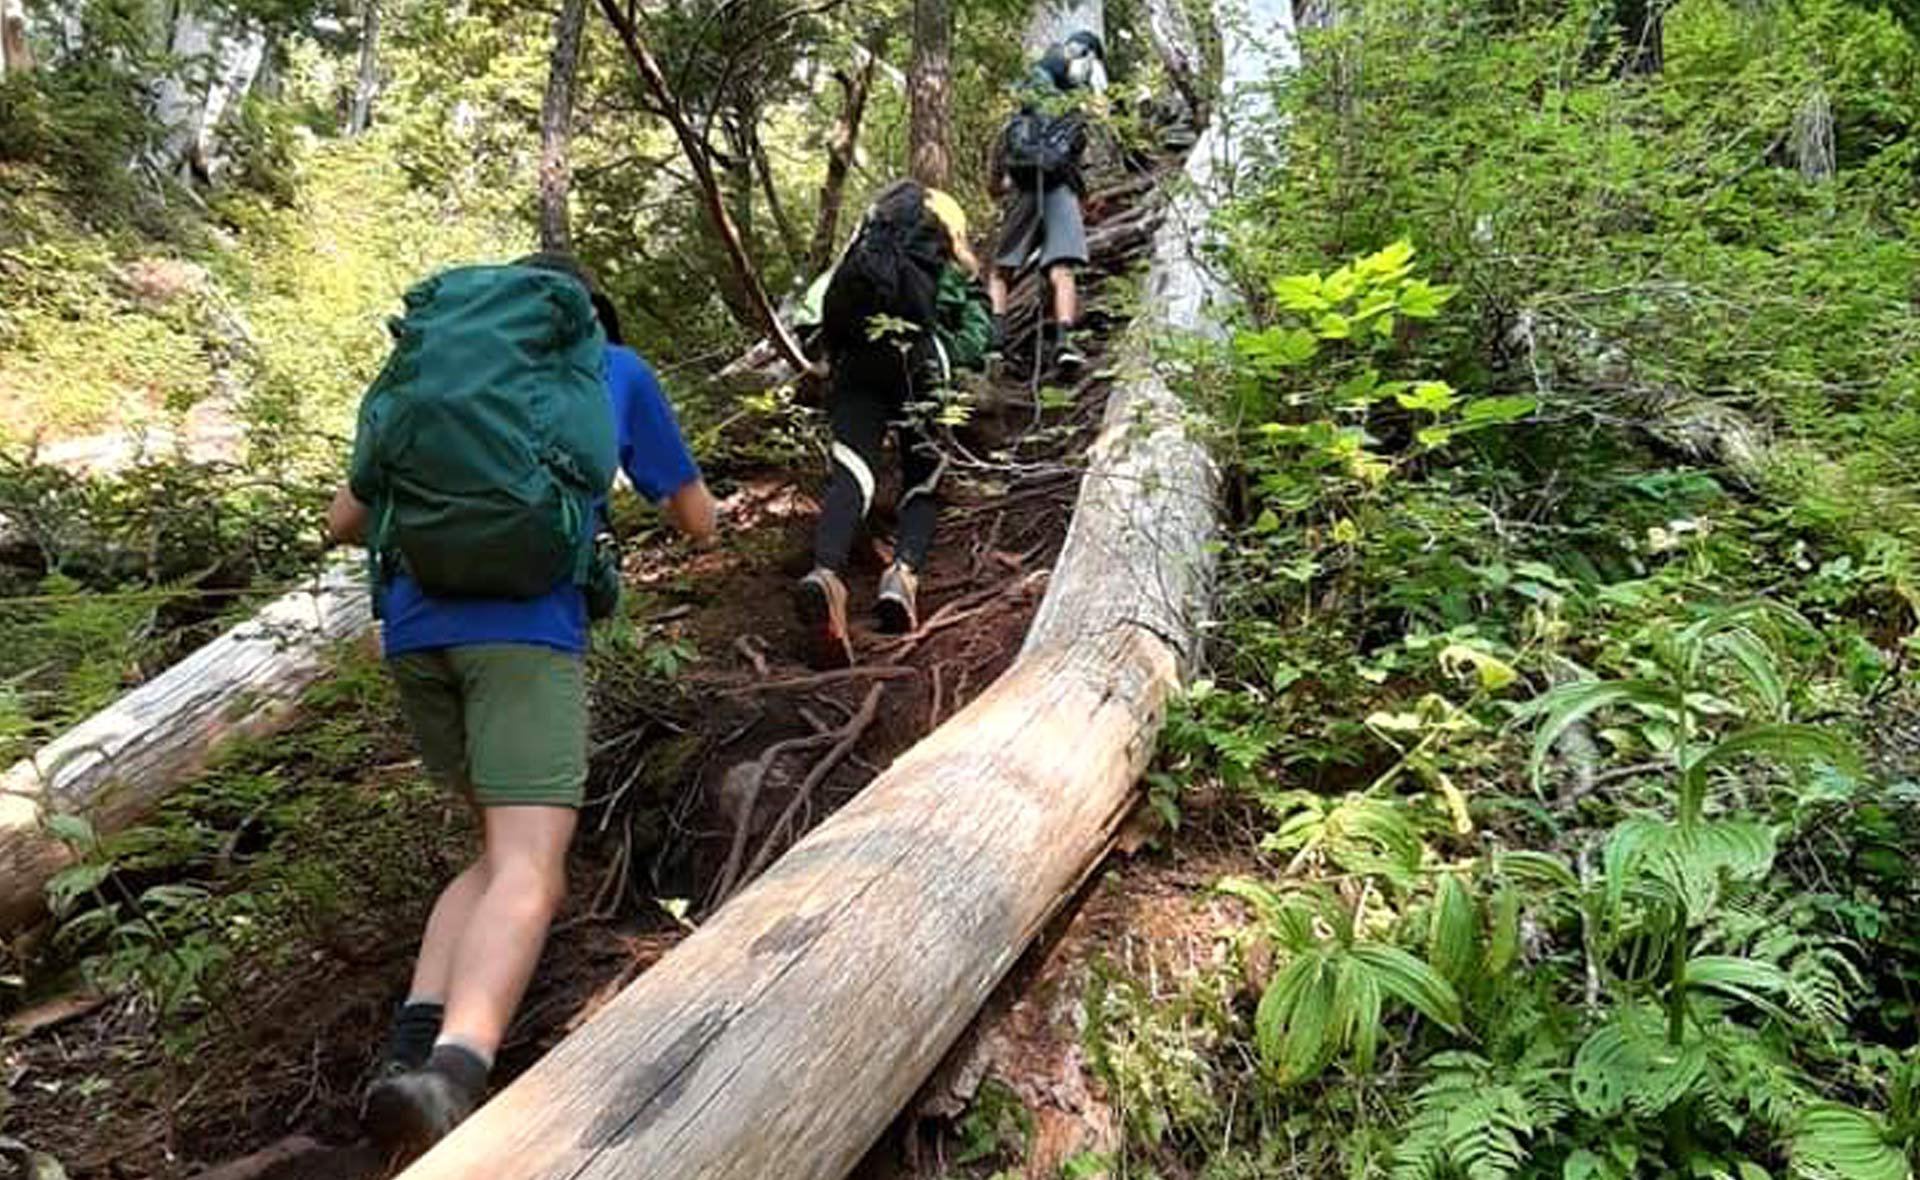 Three Scouts with backpacks hiking in the forest and climbing a steep embankment with fallen trees and tree roots.